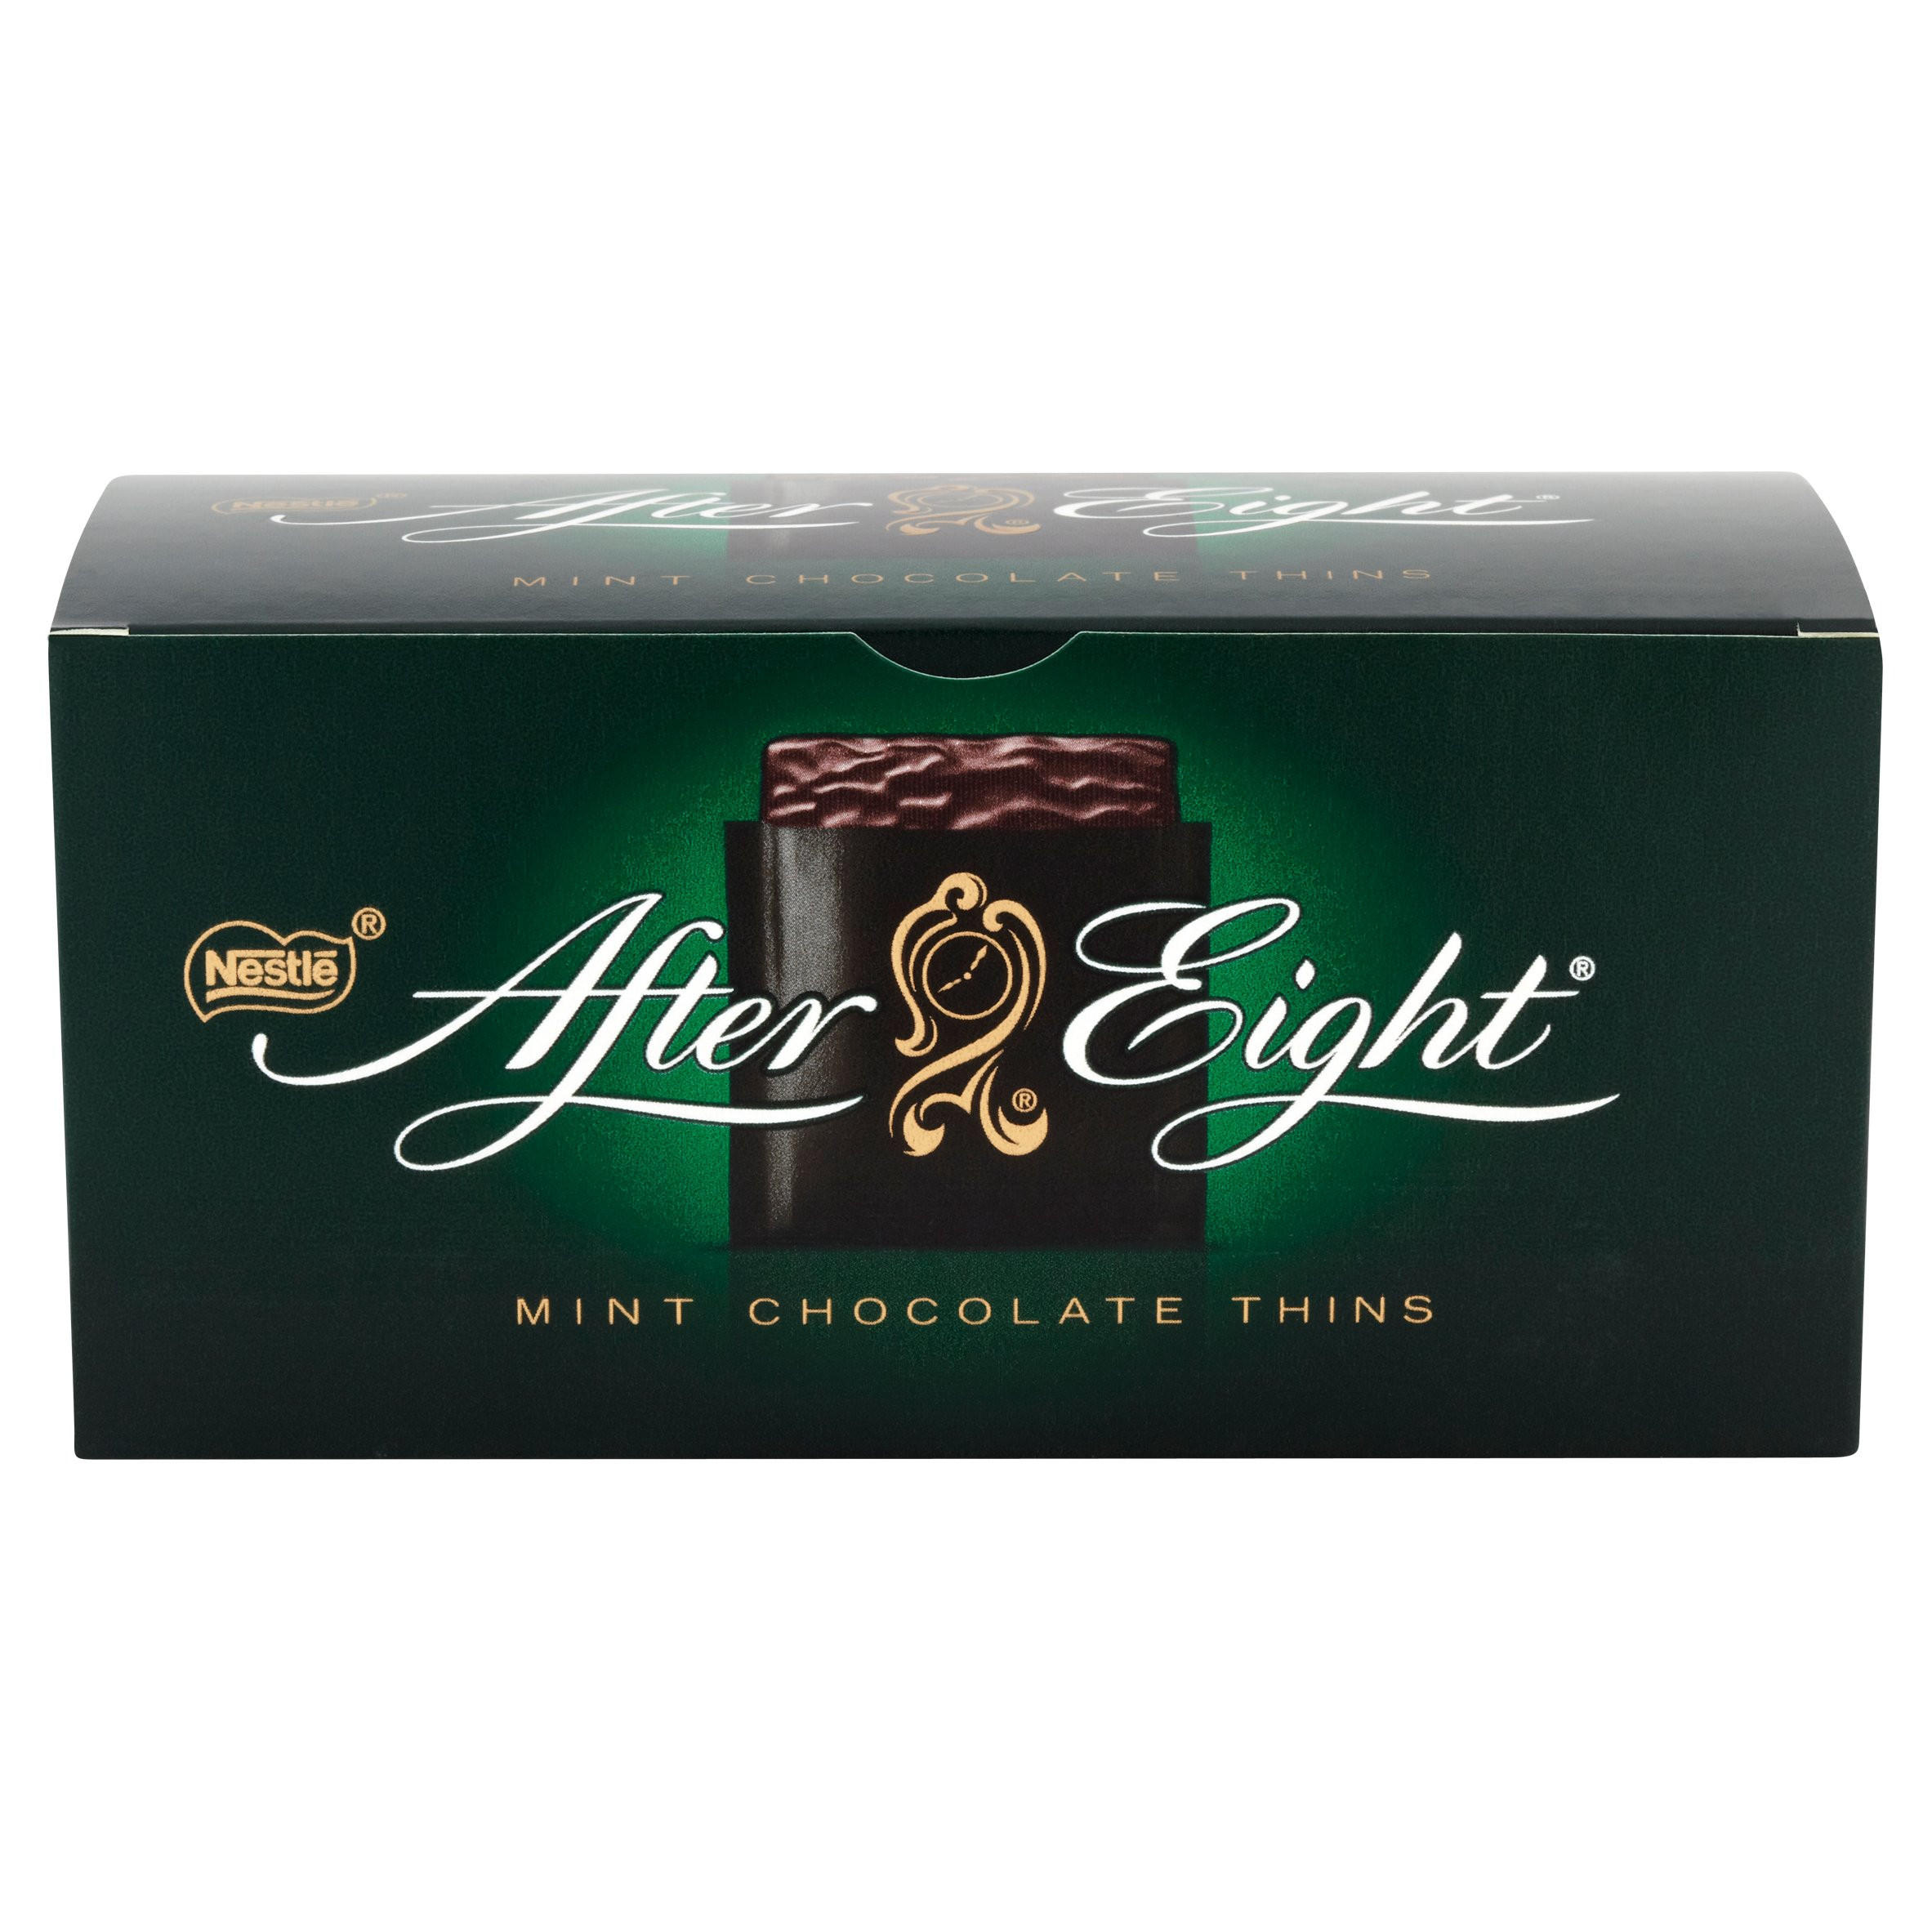 Nestlé After Eight Mint Chocolate Thins 140g | Chocolate Boxes & Gifts ...